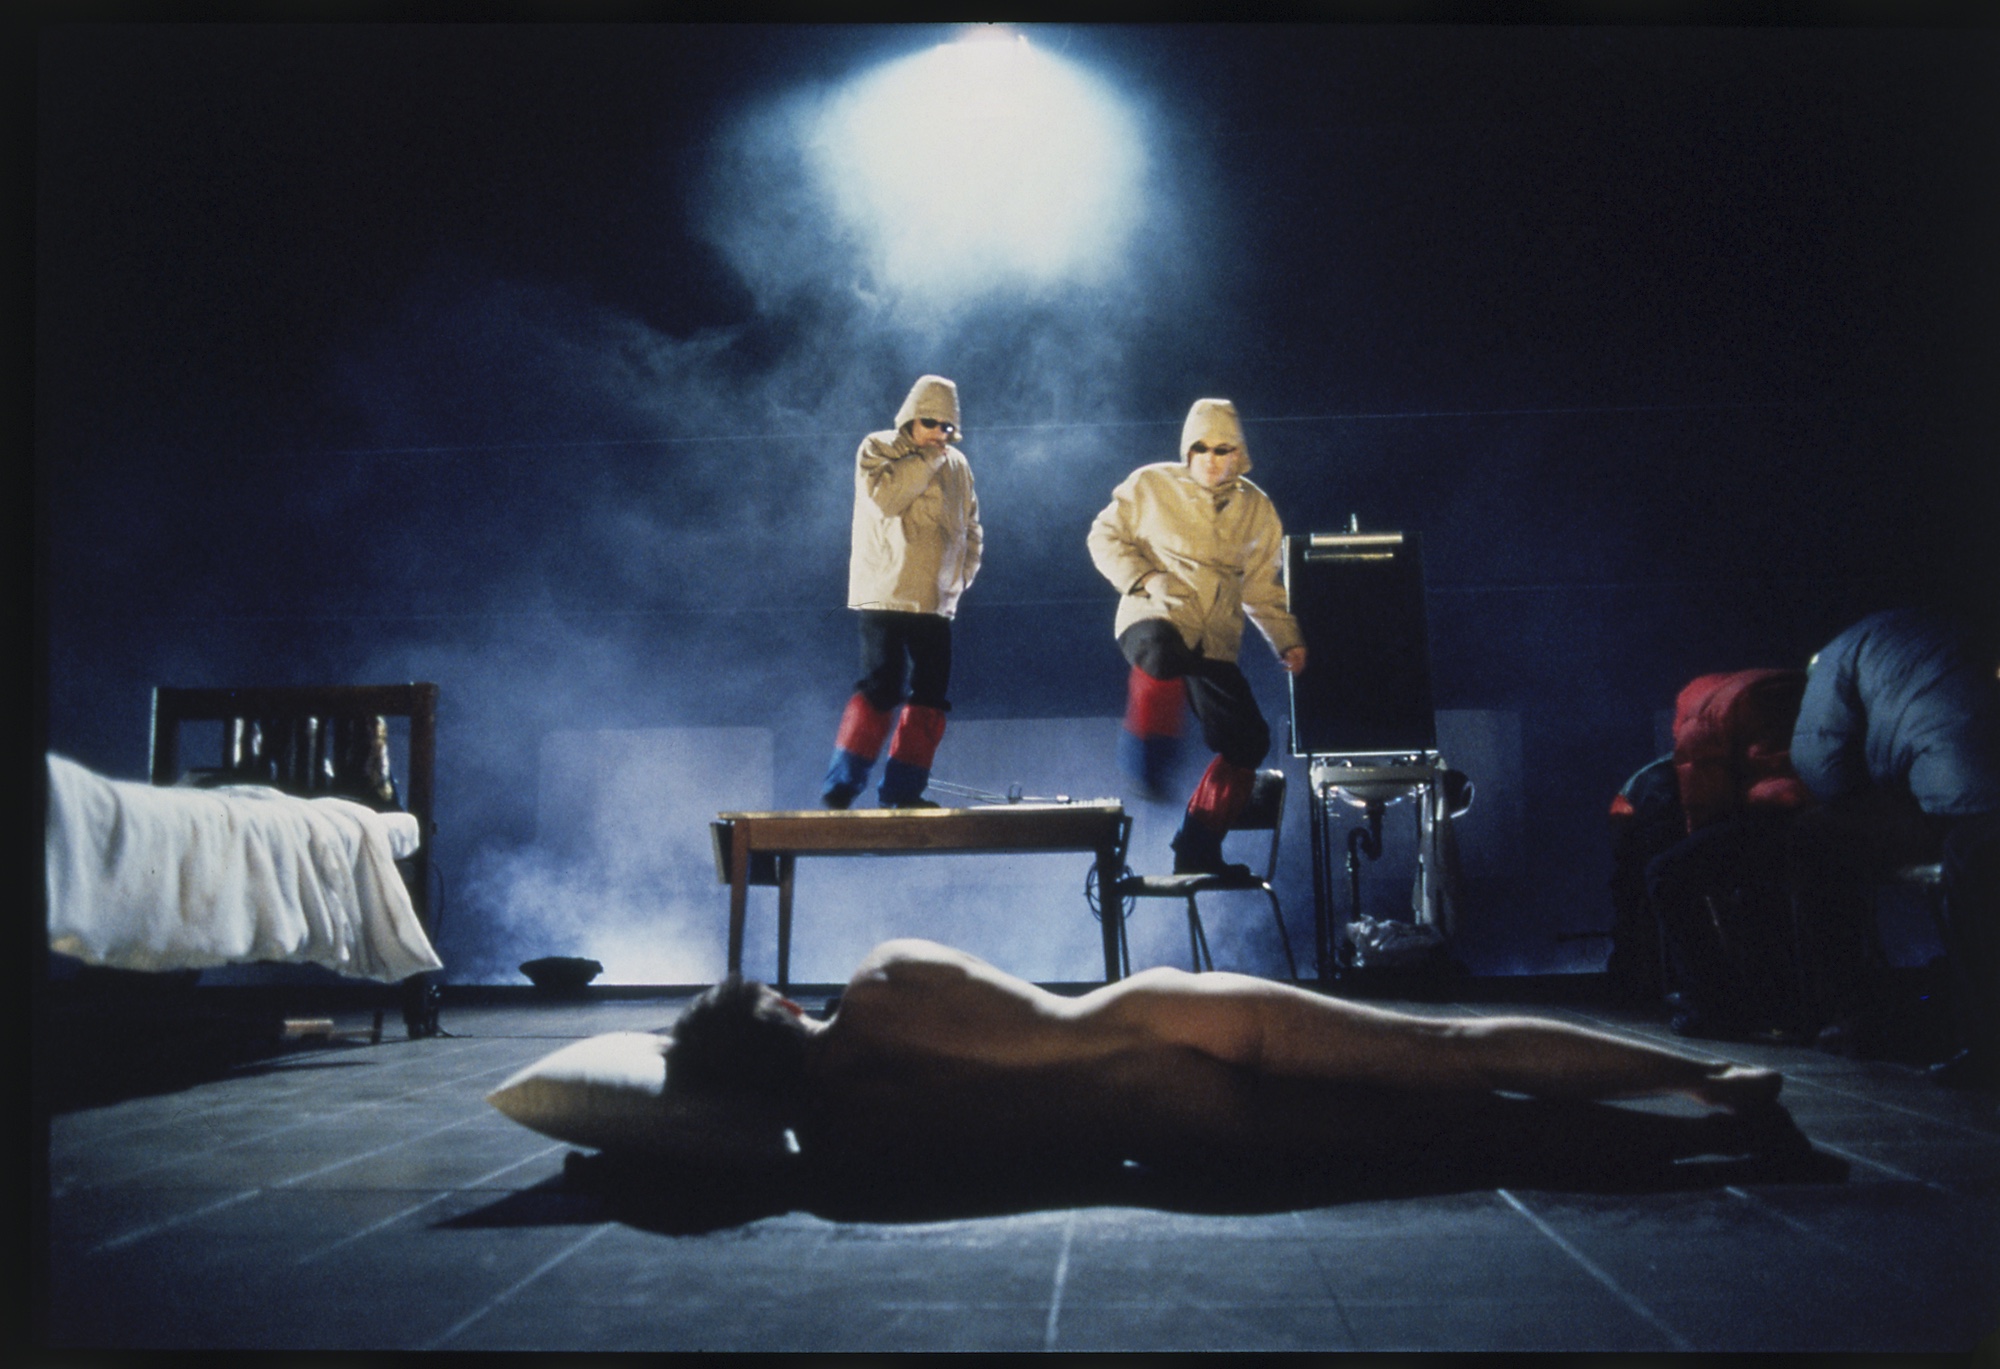 Two actors in yellow raincoats stand on a table and a chair staring intensely a naked actor lying on the floor, who has their back to us.